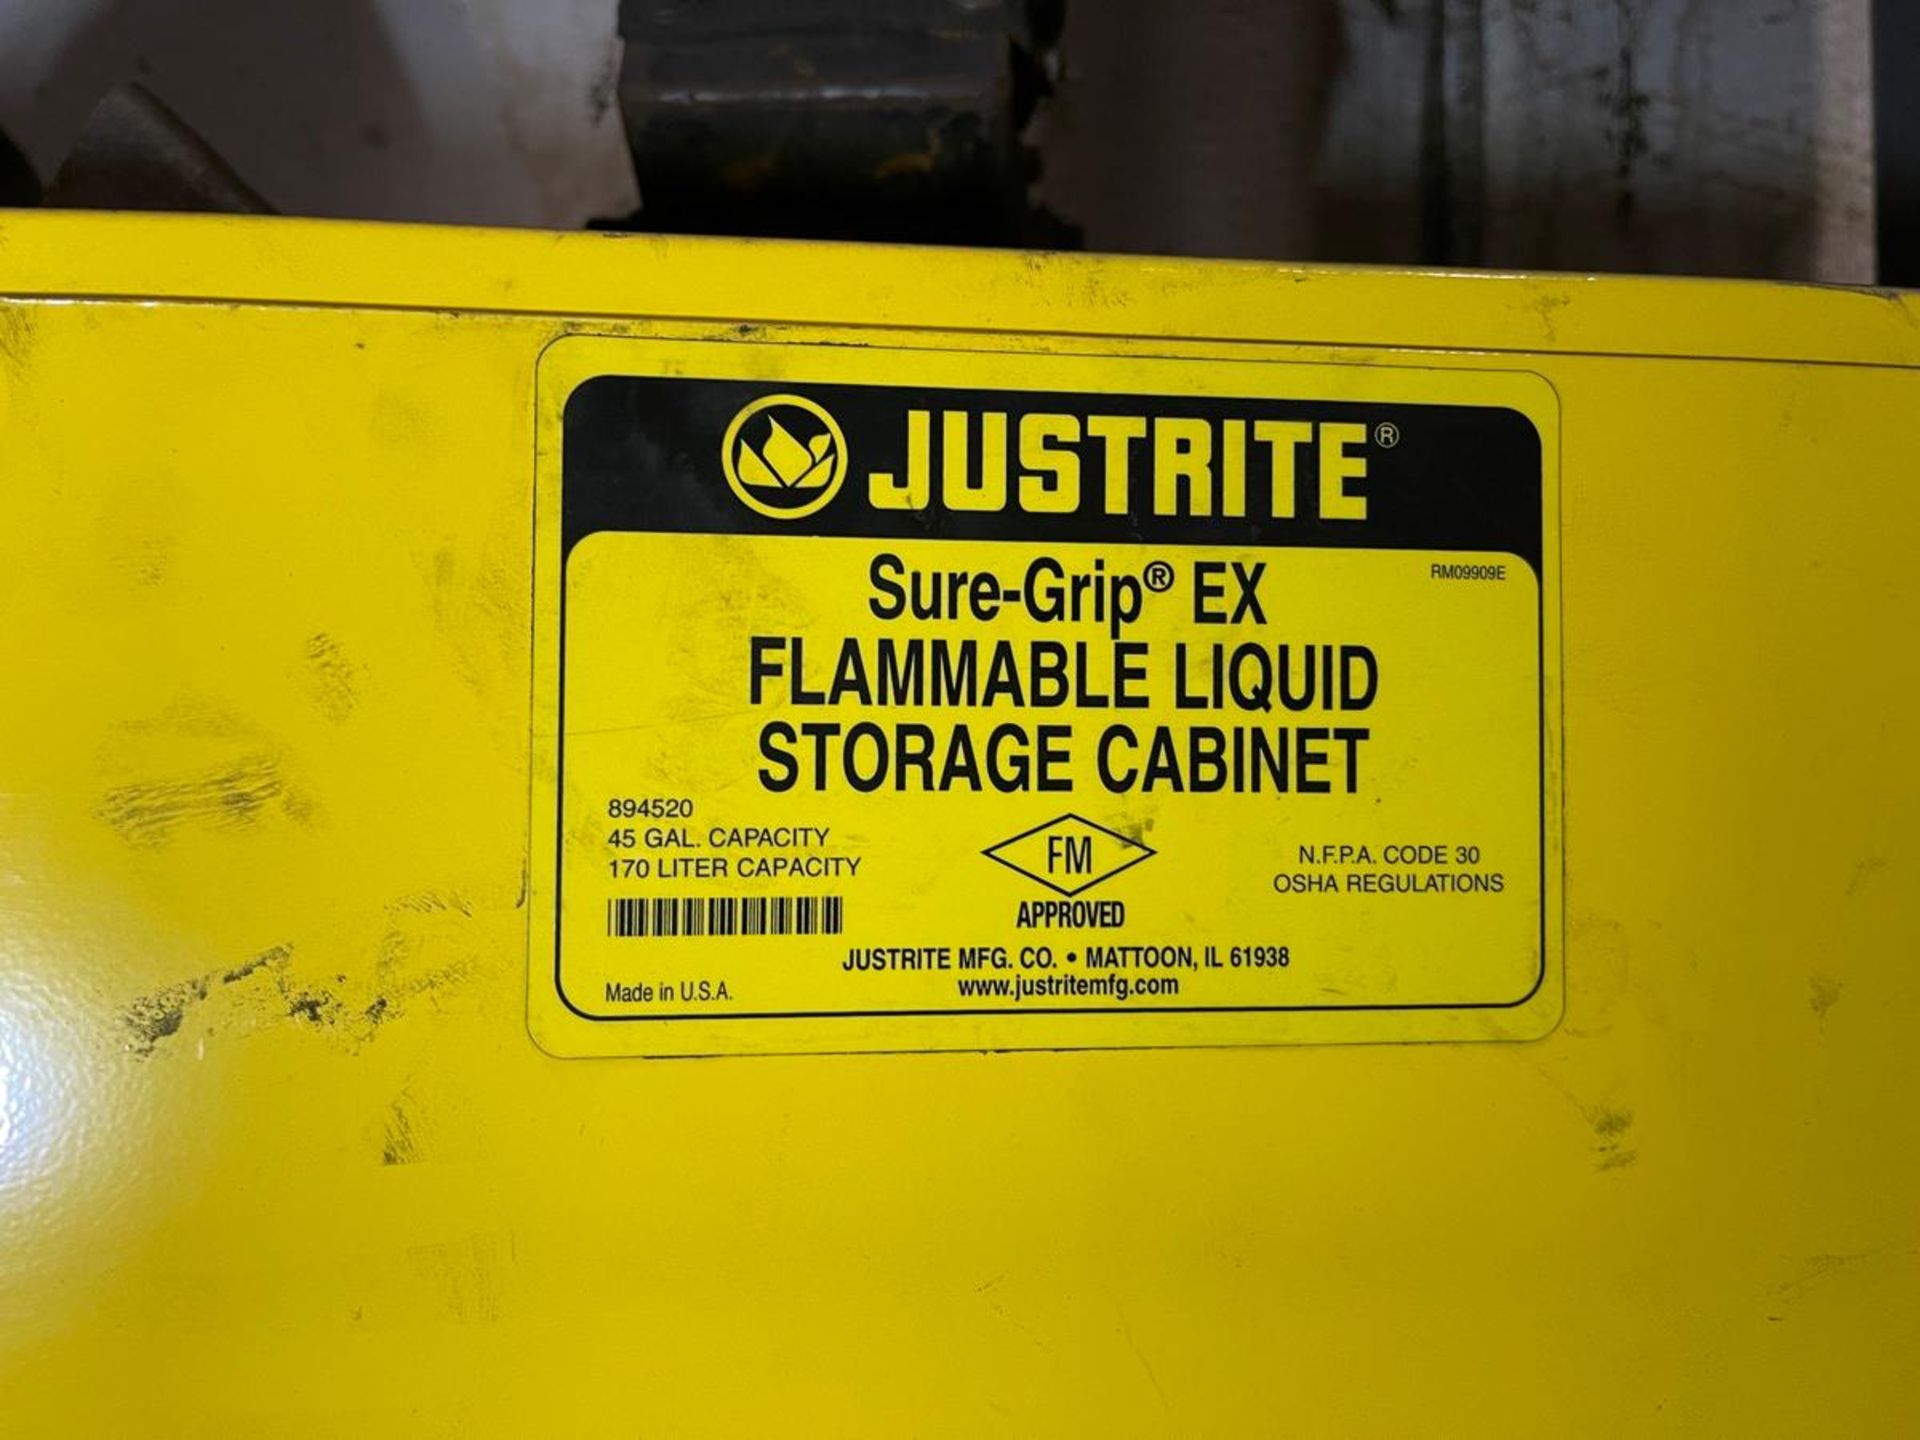 Justrite 45 Gal. Flammable Safety Storage Cabinet - Image 2 of 2